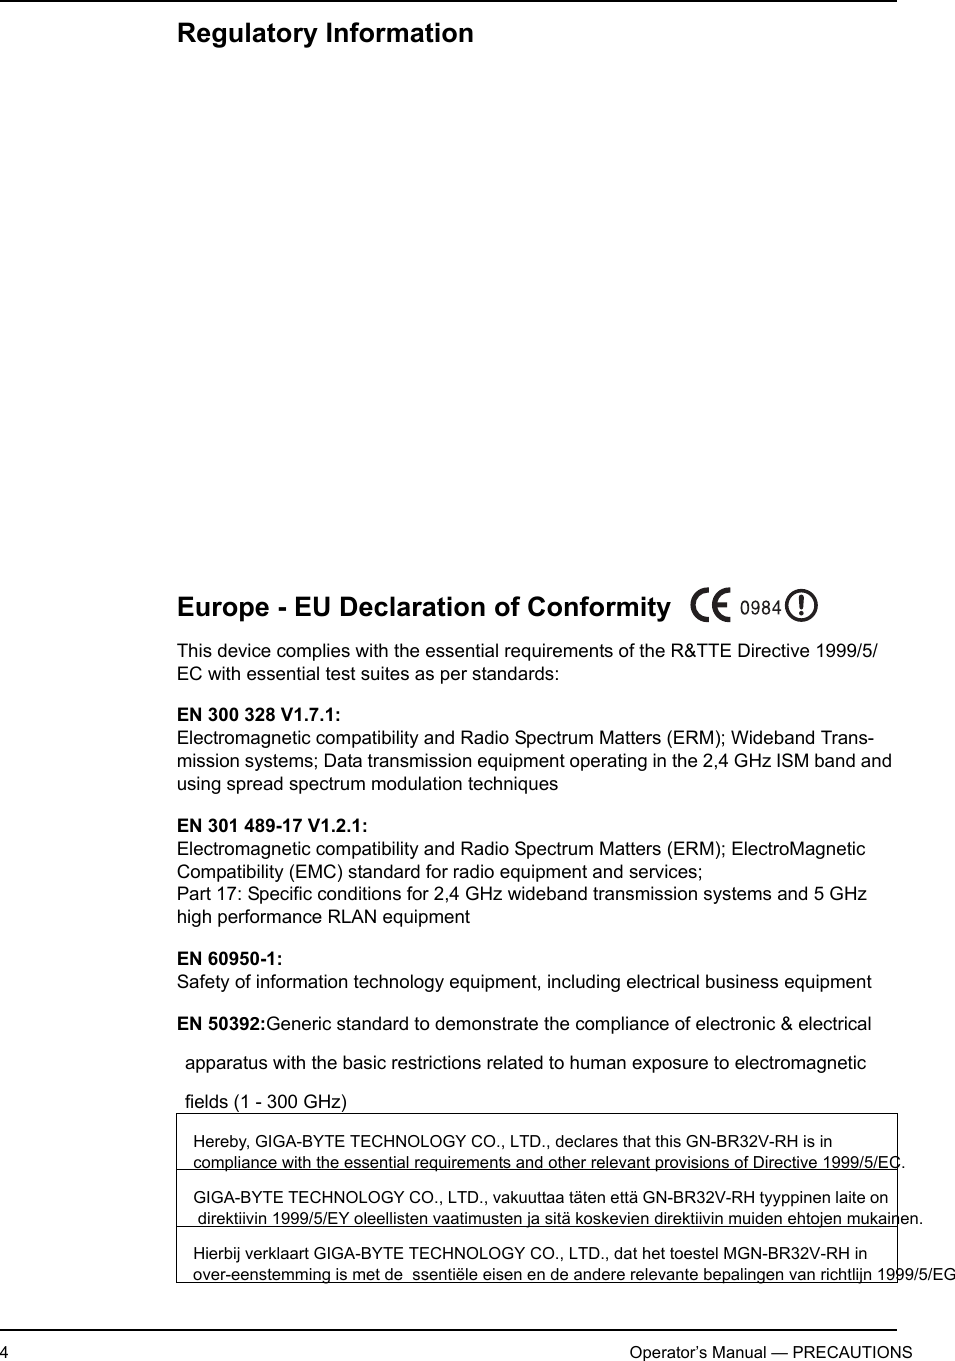 4                   Operator’s Manual — PRECAUTIONSRegulatory Information             Europe - EU Declaration of ConformityThis device complies with the essential requirements of the R&amp;TTE Directive 1999/5/EC with essential test suites as per standards:EN 300 328 V1.7.1:Electromagnetic compatibility and Radio Spectrum Matters (ERM); Wideband Trans-mission systems; Data transmission equipment operating in the 2,4 GHz ISM band and using spread spectrum modulation techniquesEN 301 489-17 V1.2.1:Electromagnetic compatibility and Radio Spectrum Matters (ERM); ElectroMagnetic Compatibility (EMC) standard for radio equipment and services; Part 17: Specific conditions for 2,4 GHz wideband transmission systems and 5 GHz high performance RLAN equipmentEN 60950-1:Safety of information technology equipment, including electrical business equipmentEN 50392:Generic standard to demonstrate the compliance of electronic &amp; electrical apparatus with the basic restrictions related to human exposure to electromagnetic fields (1 - 300 GHz)Hereby, GIGA-BYTE TECHNOLOGY CO., LTD., declares that this GN-BR32V-RH is in   compliance with the essential requirements and other relevant provisions of Directive 1999/5/EC.GIGA-BYTE TECHNOLOGY CO., LTD., vakuuttaa täten että GN-BR32V-RH tyyppinen laite on   direktiivin 1999/5/EY oleellisten vaatimusten ja sitä koskevien direktiivin muiden ehtojen mukainen.Hierbij verklaart GIGA-BYTE TECHNOLOGY CO., LTD., dat het toestel MGN-BR32V-RH in  over-eenstemming is met de  ssentiële eisen en de andere relevante bepalingen van richtlijn 1999/5/EG